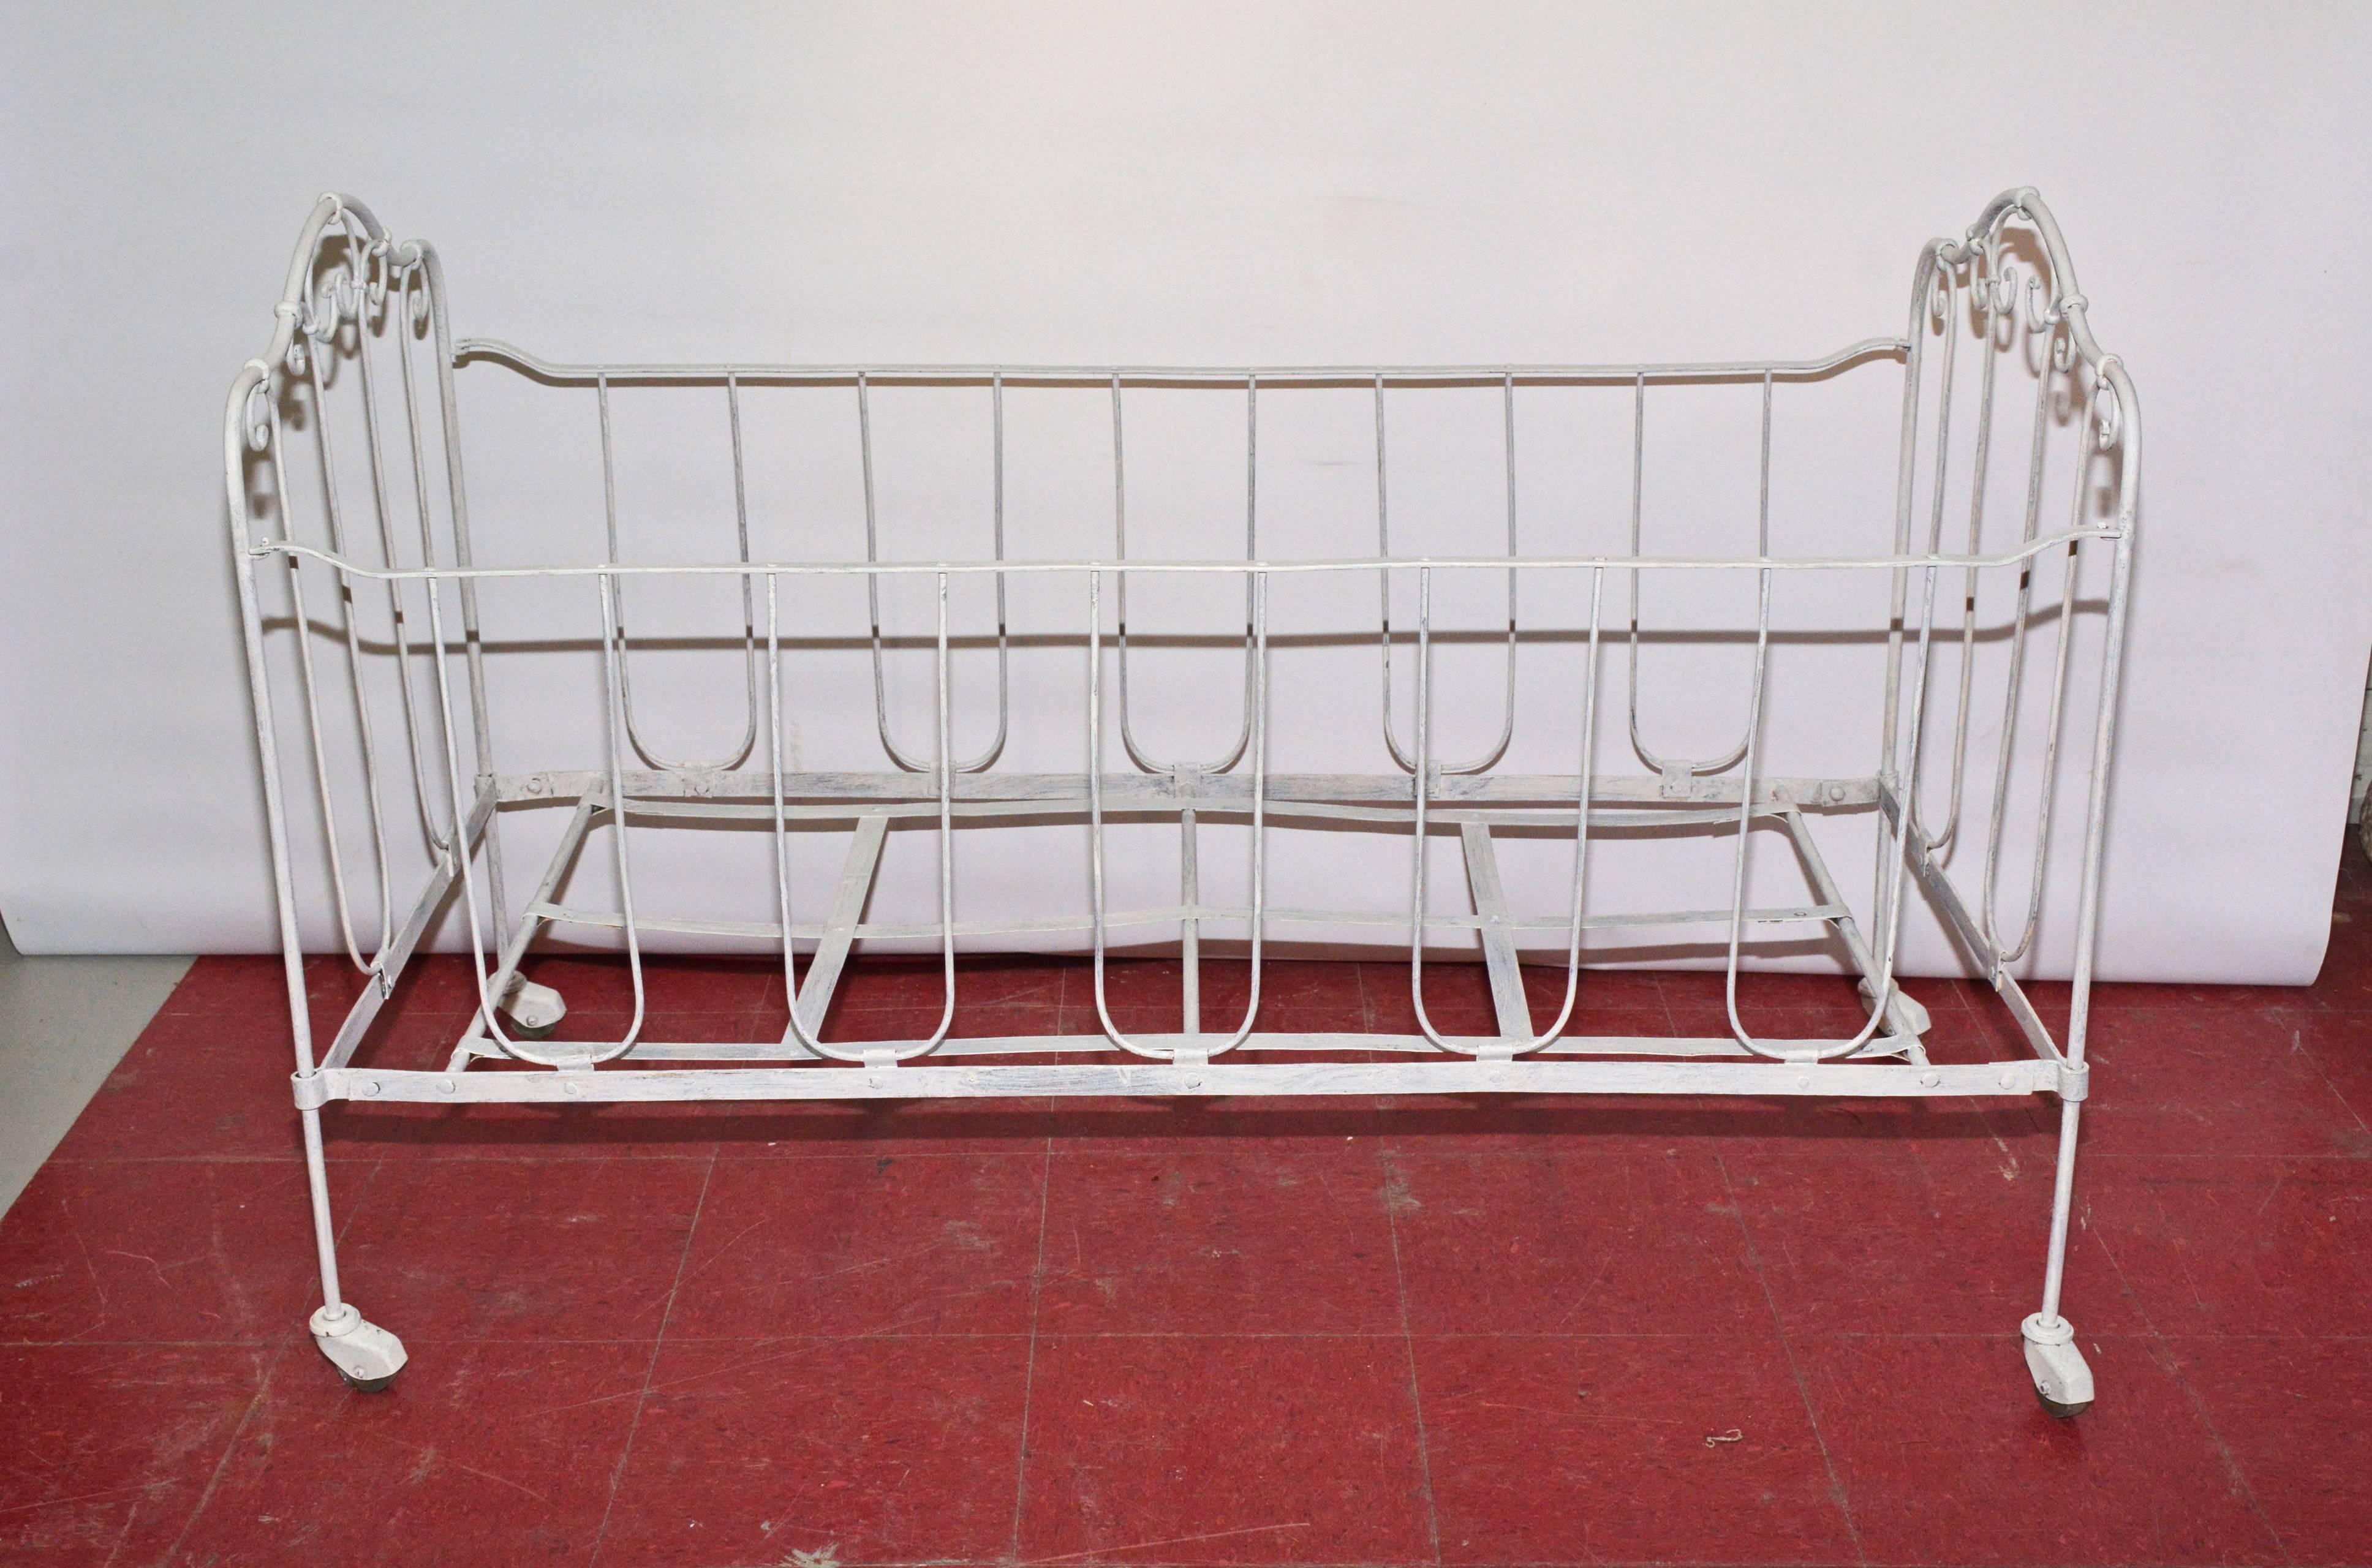 This handworked wrought iron crib rolls on casters for easy movability. The slatted bottom will hold a mattress and bumpers may be tied to the vertical supports. The end framing is decorated with curlicues. The crib is newly painted white. Front